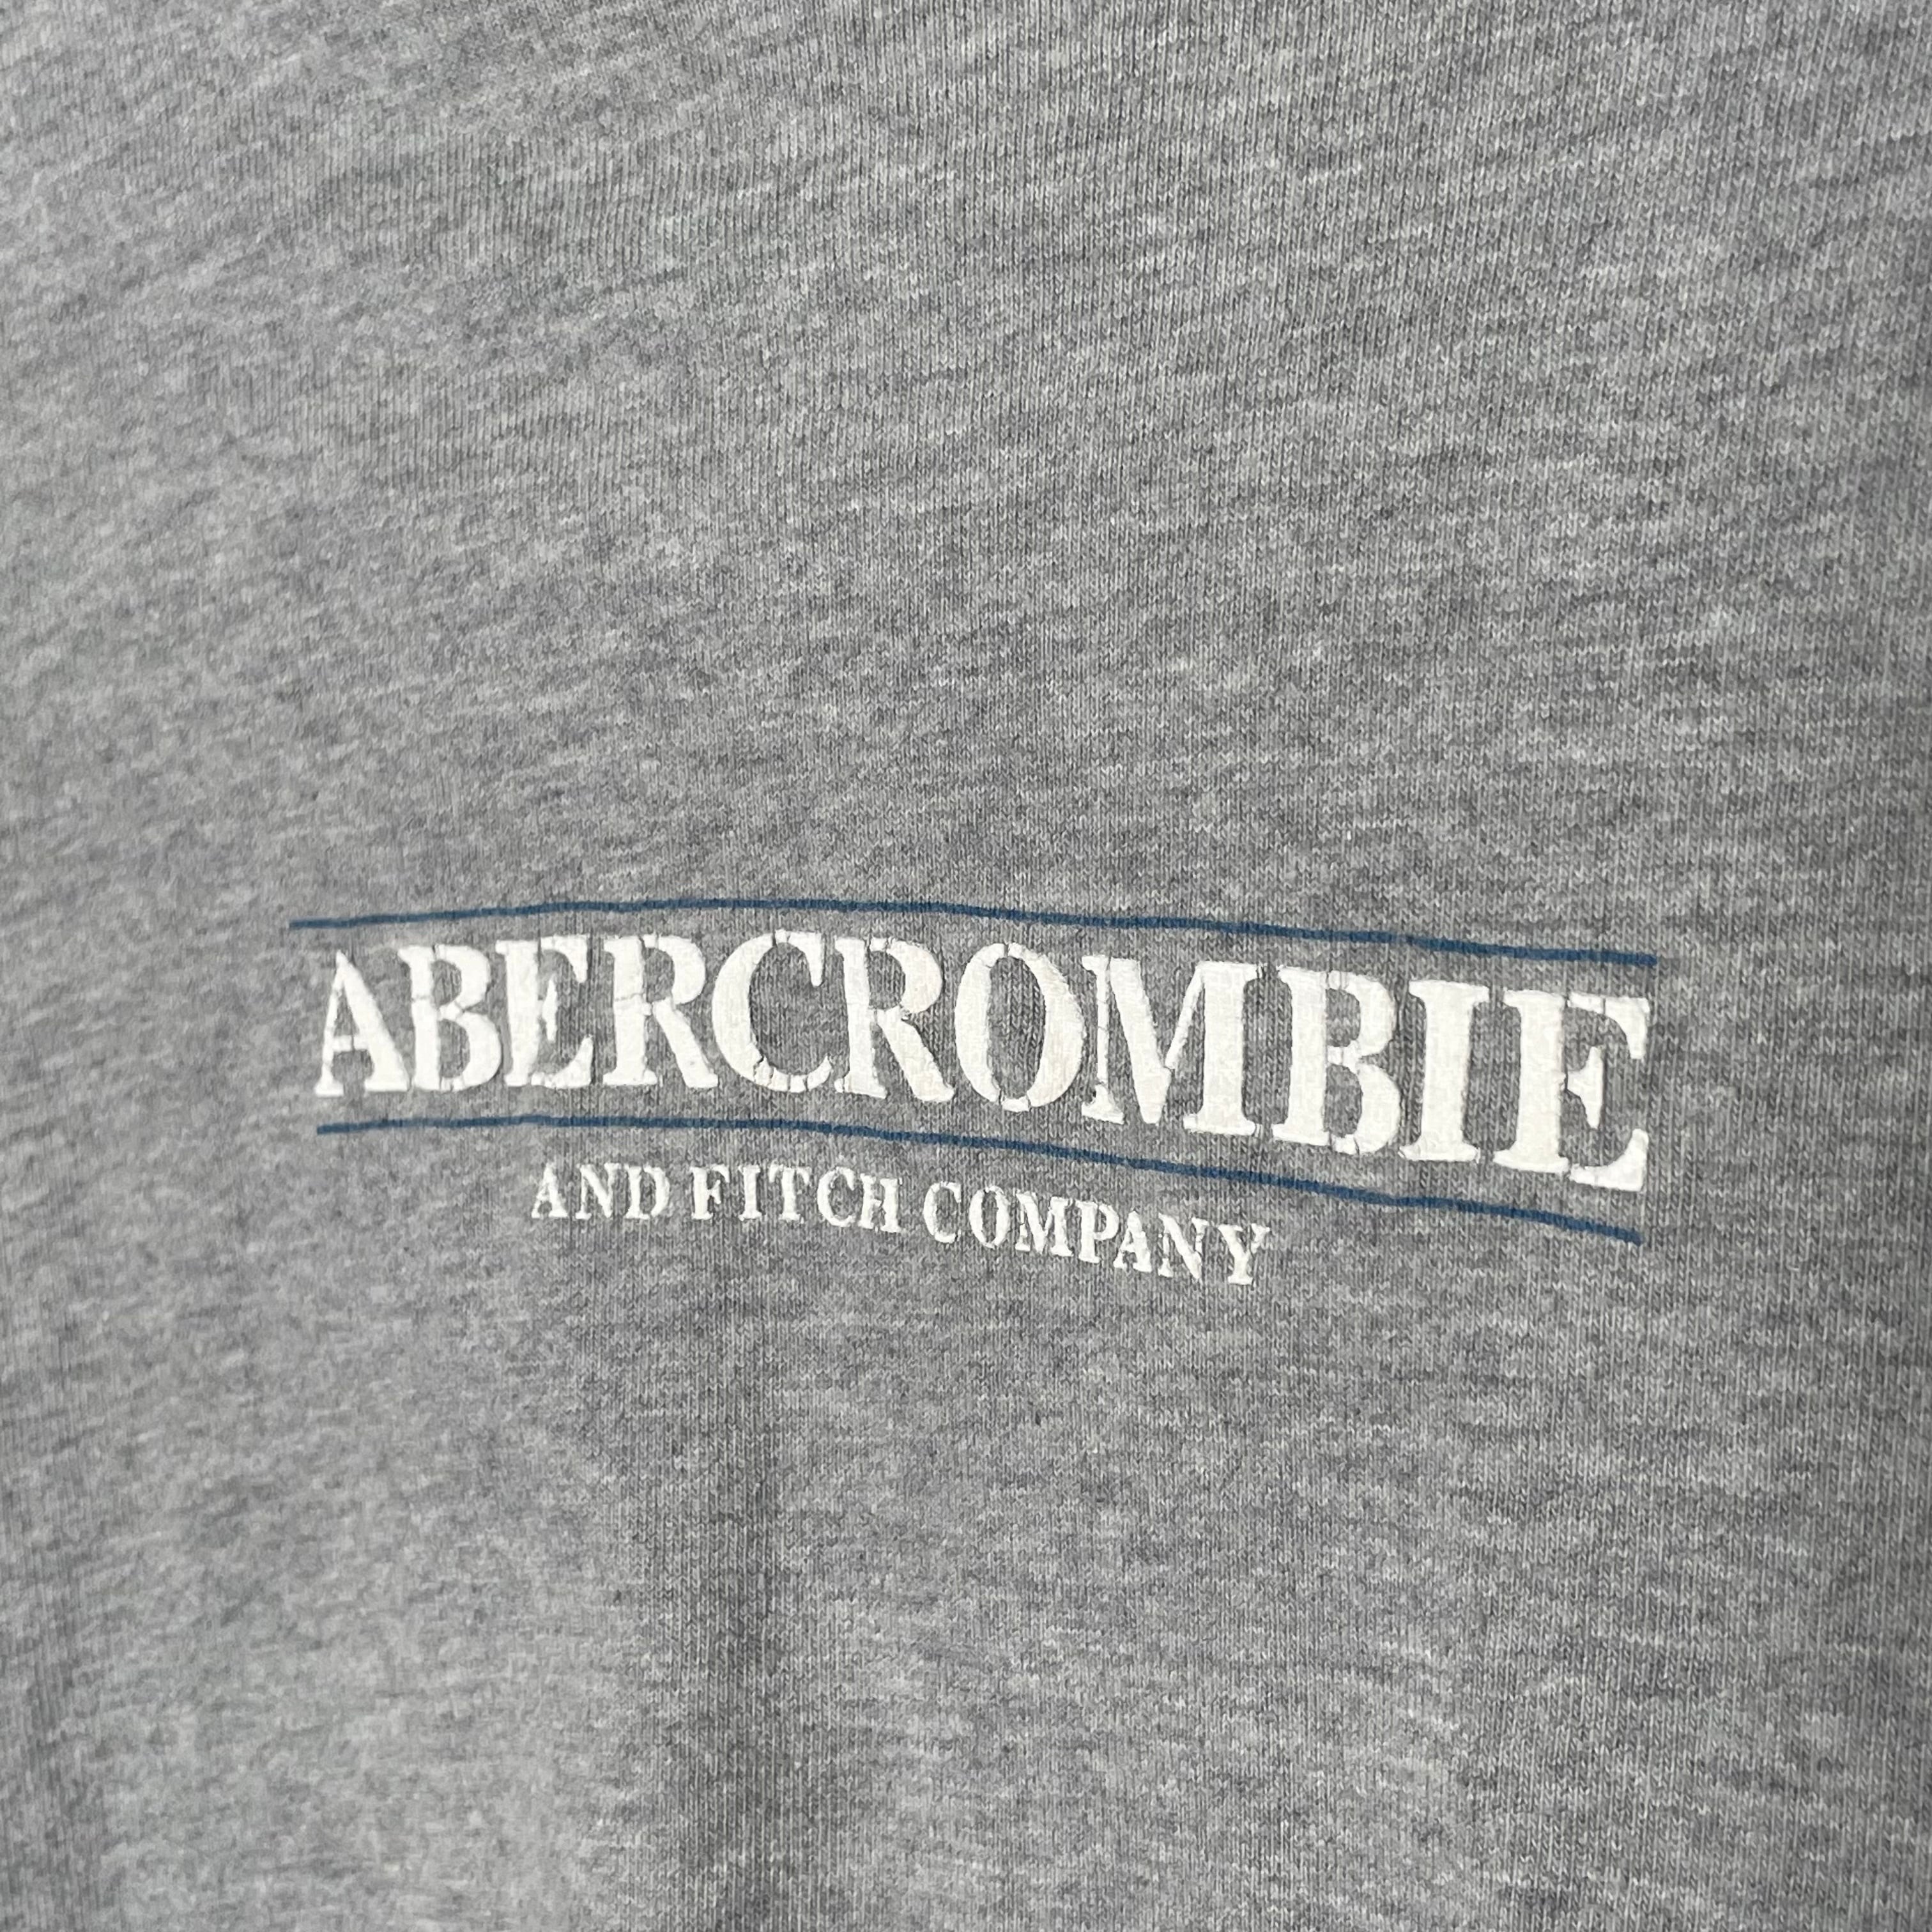 Abercrombie&Fitch A＆FITCH NYロゴ 長袖Tシャツ L